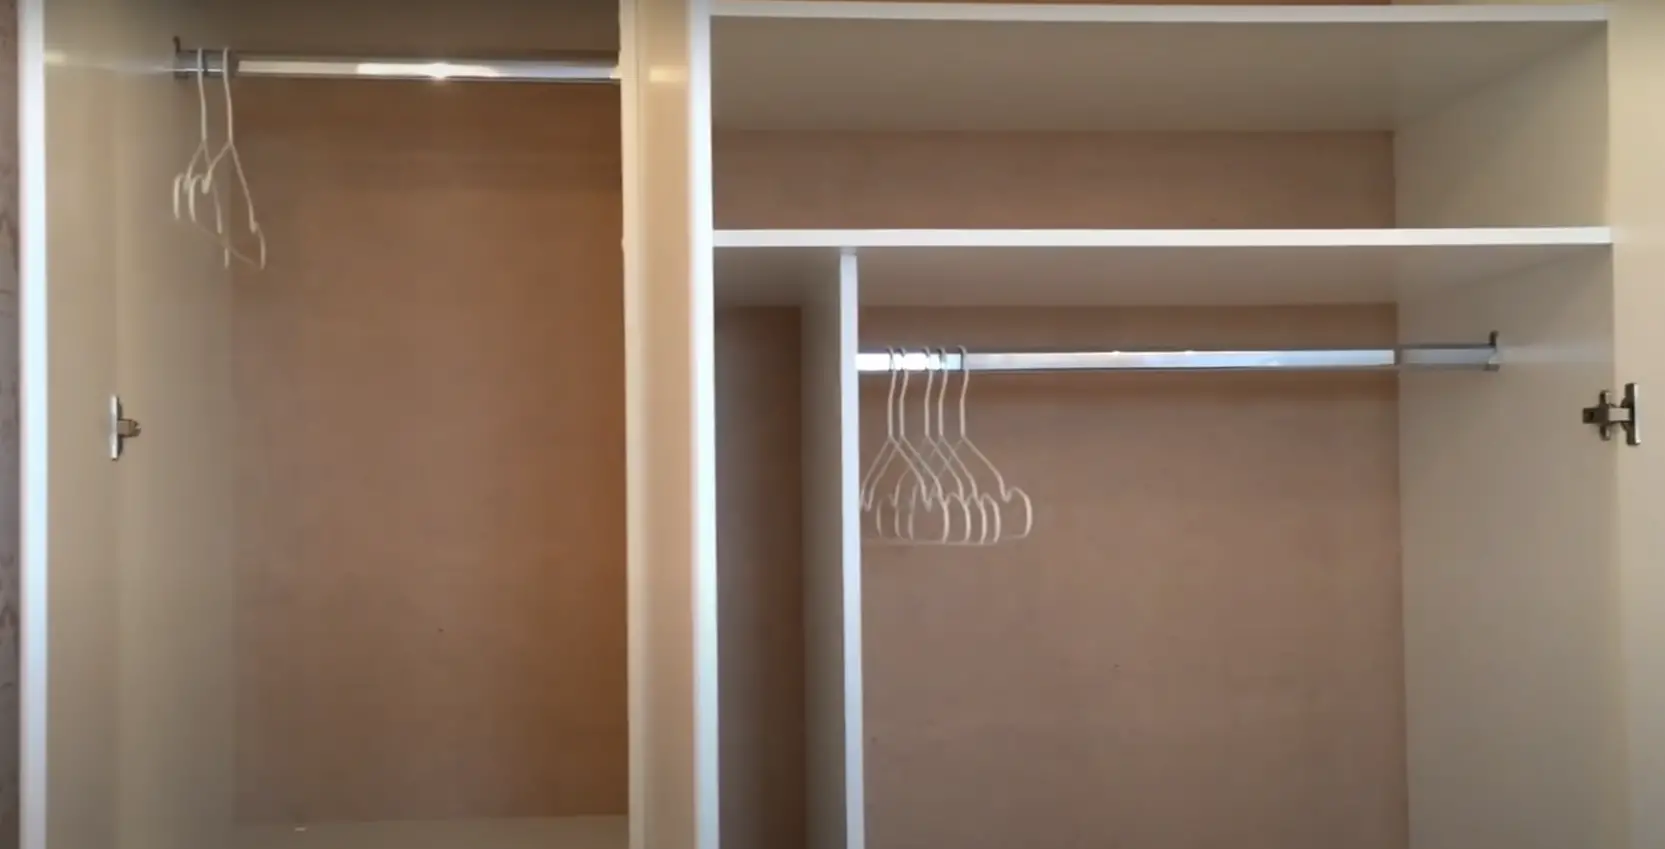 Utilize Your Shelves and Cabinet Space